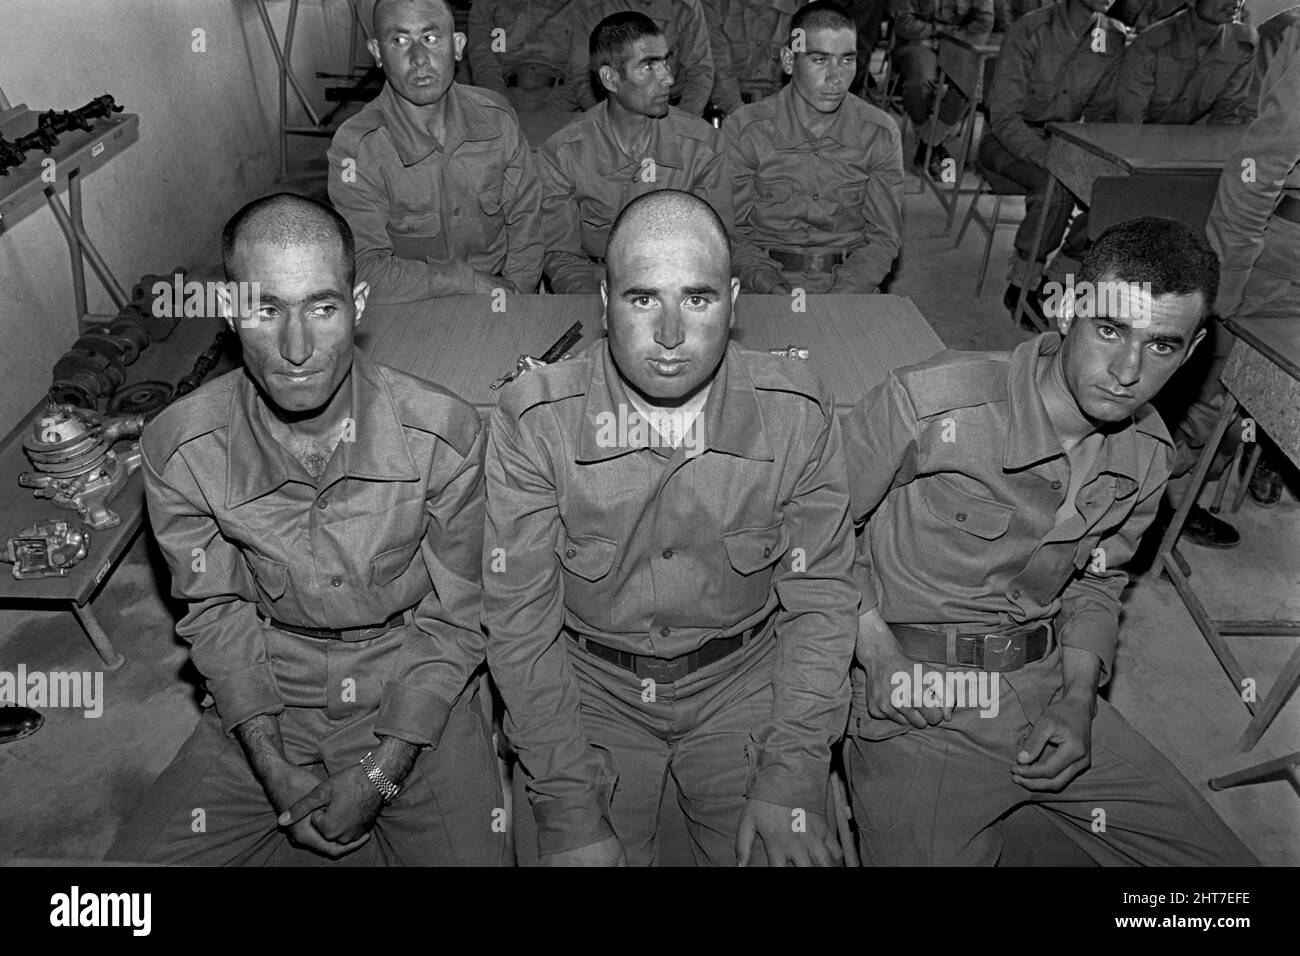 KABUL, AFGHANISTAN. 30th April 1988. Afghan Army conscripts during military training at the number 59 Military Technical center April 30, 1988 outside Kabul, Afghanistan. The men have been drafted into the army to fight against the mujahideen. Stock Photo